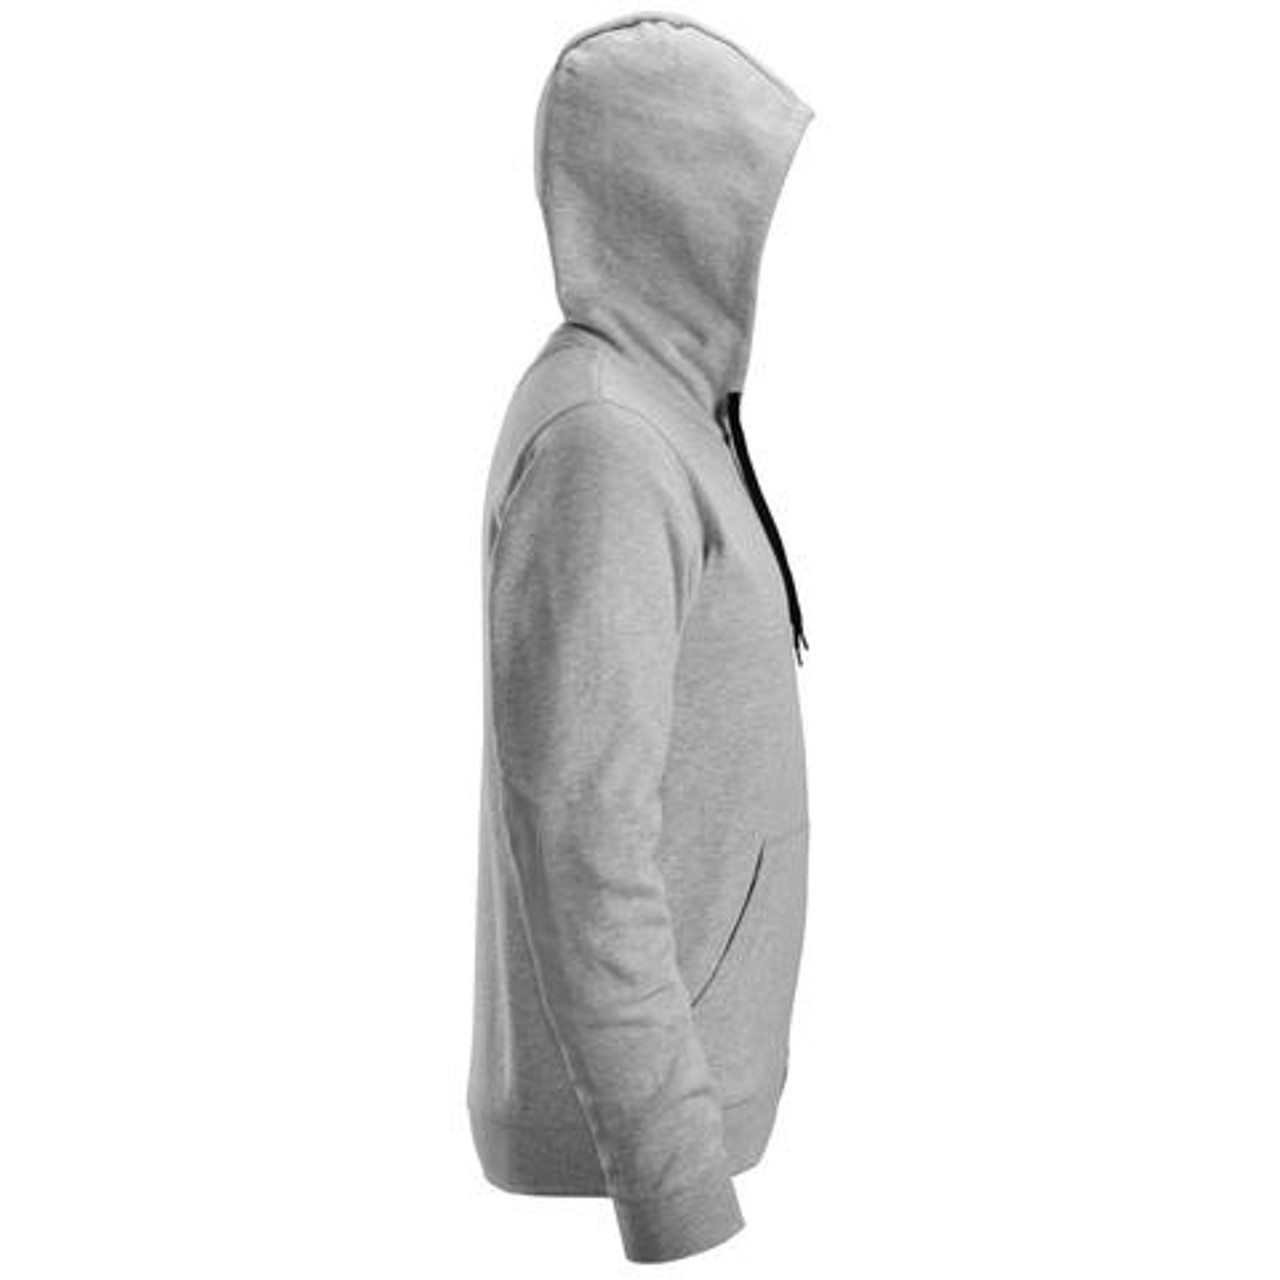 Buy online in Woodworkers Hoodie  2801  for Carpenters that are comfortable and durable.